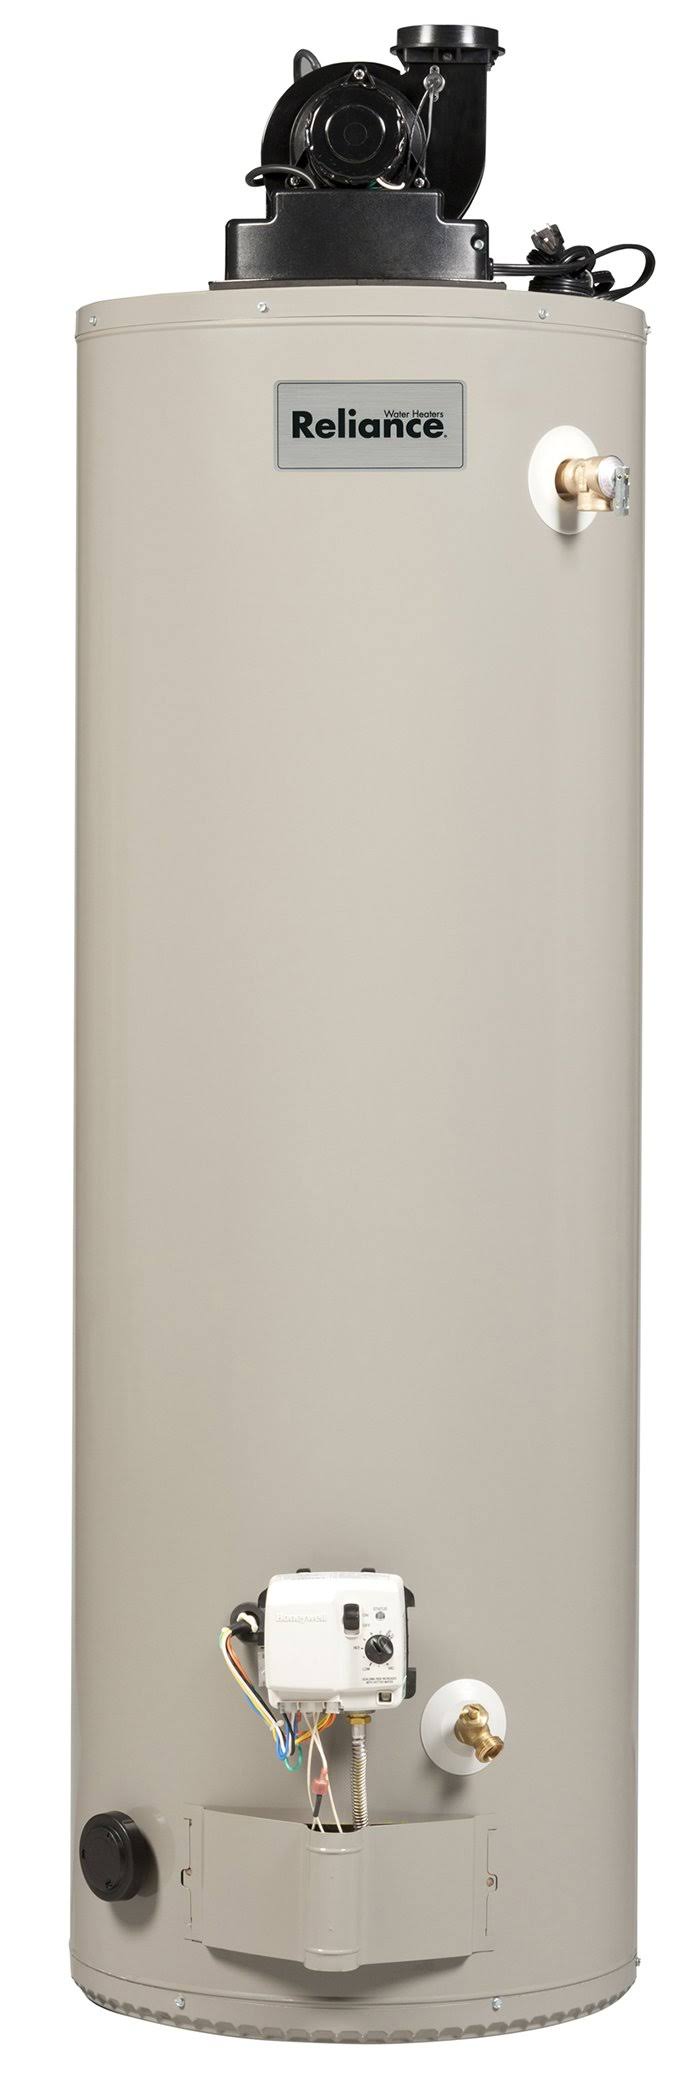 Reliance 6 50 YRVIT 50gal Natural GAS Water Heater with Power-Vent